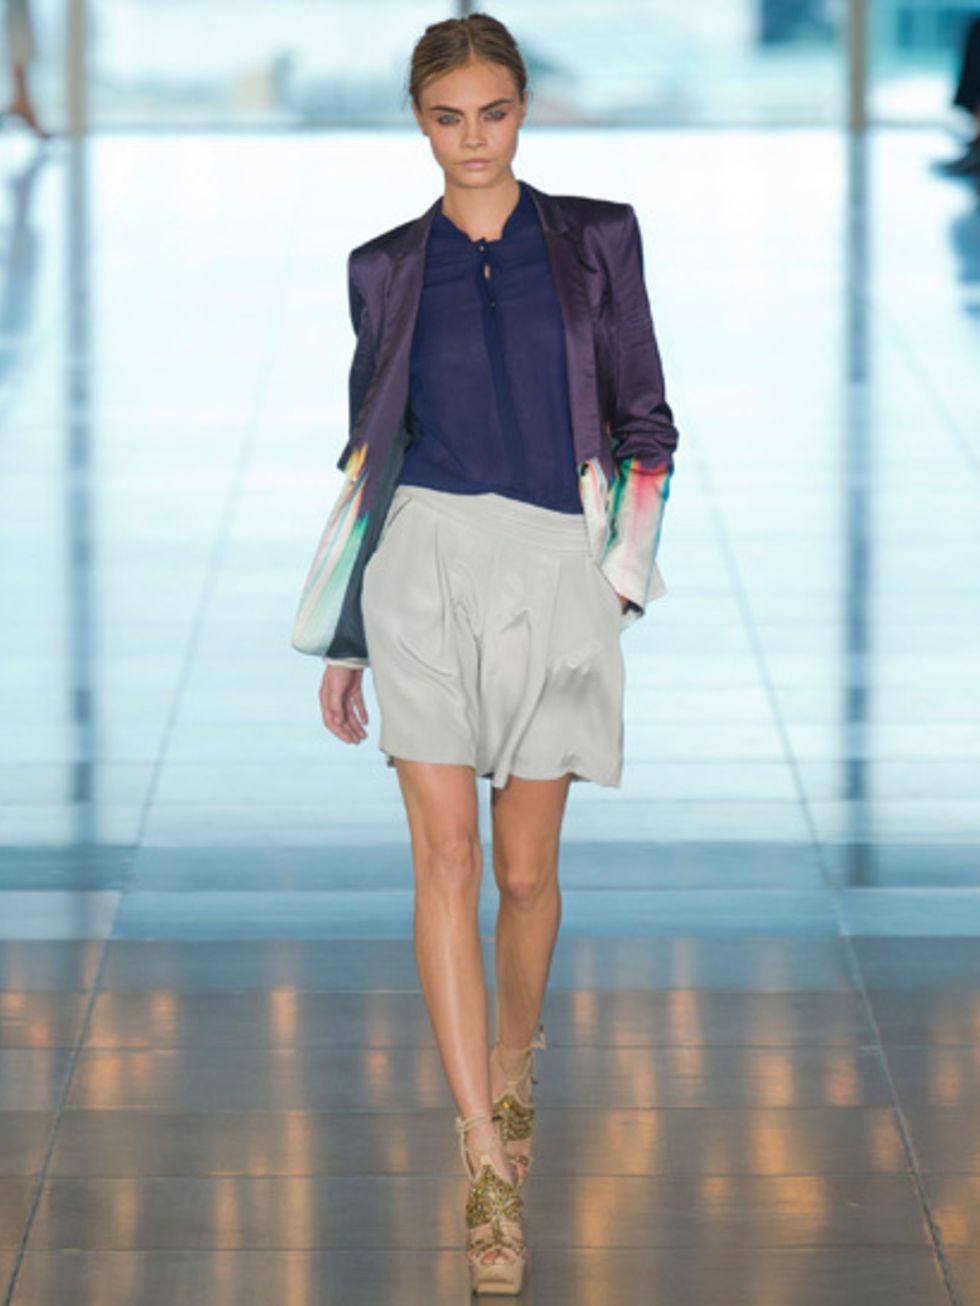 <p>A model takes to the catwalk at the Matthew Williamson SS13 show</p>